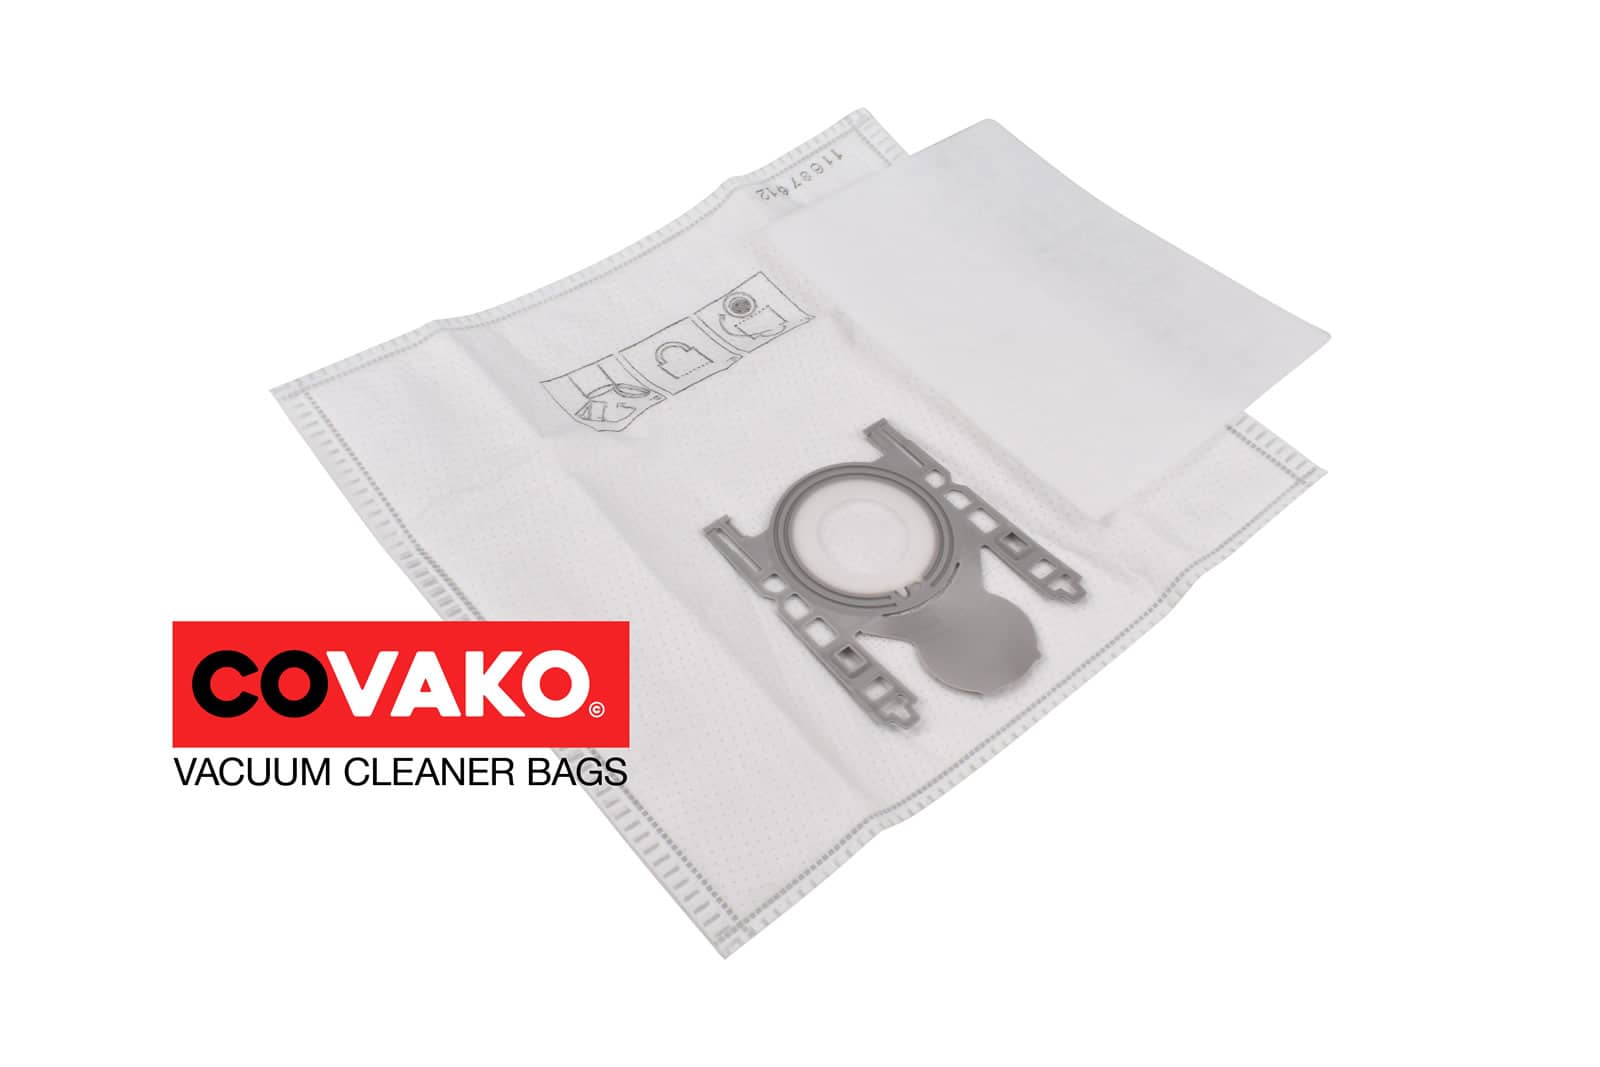 Bosch Pro Parquet / Synthesis - Bosch vacuum cleaner bags